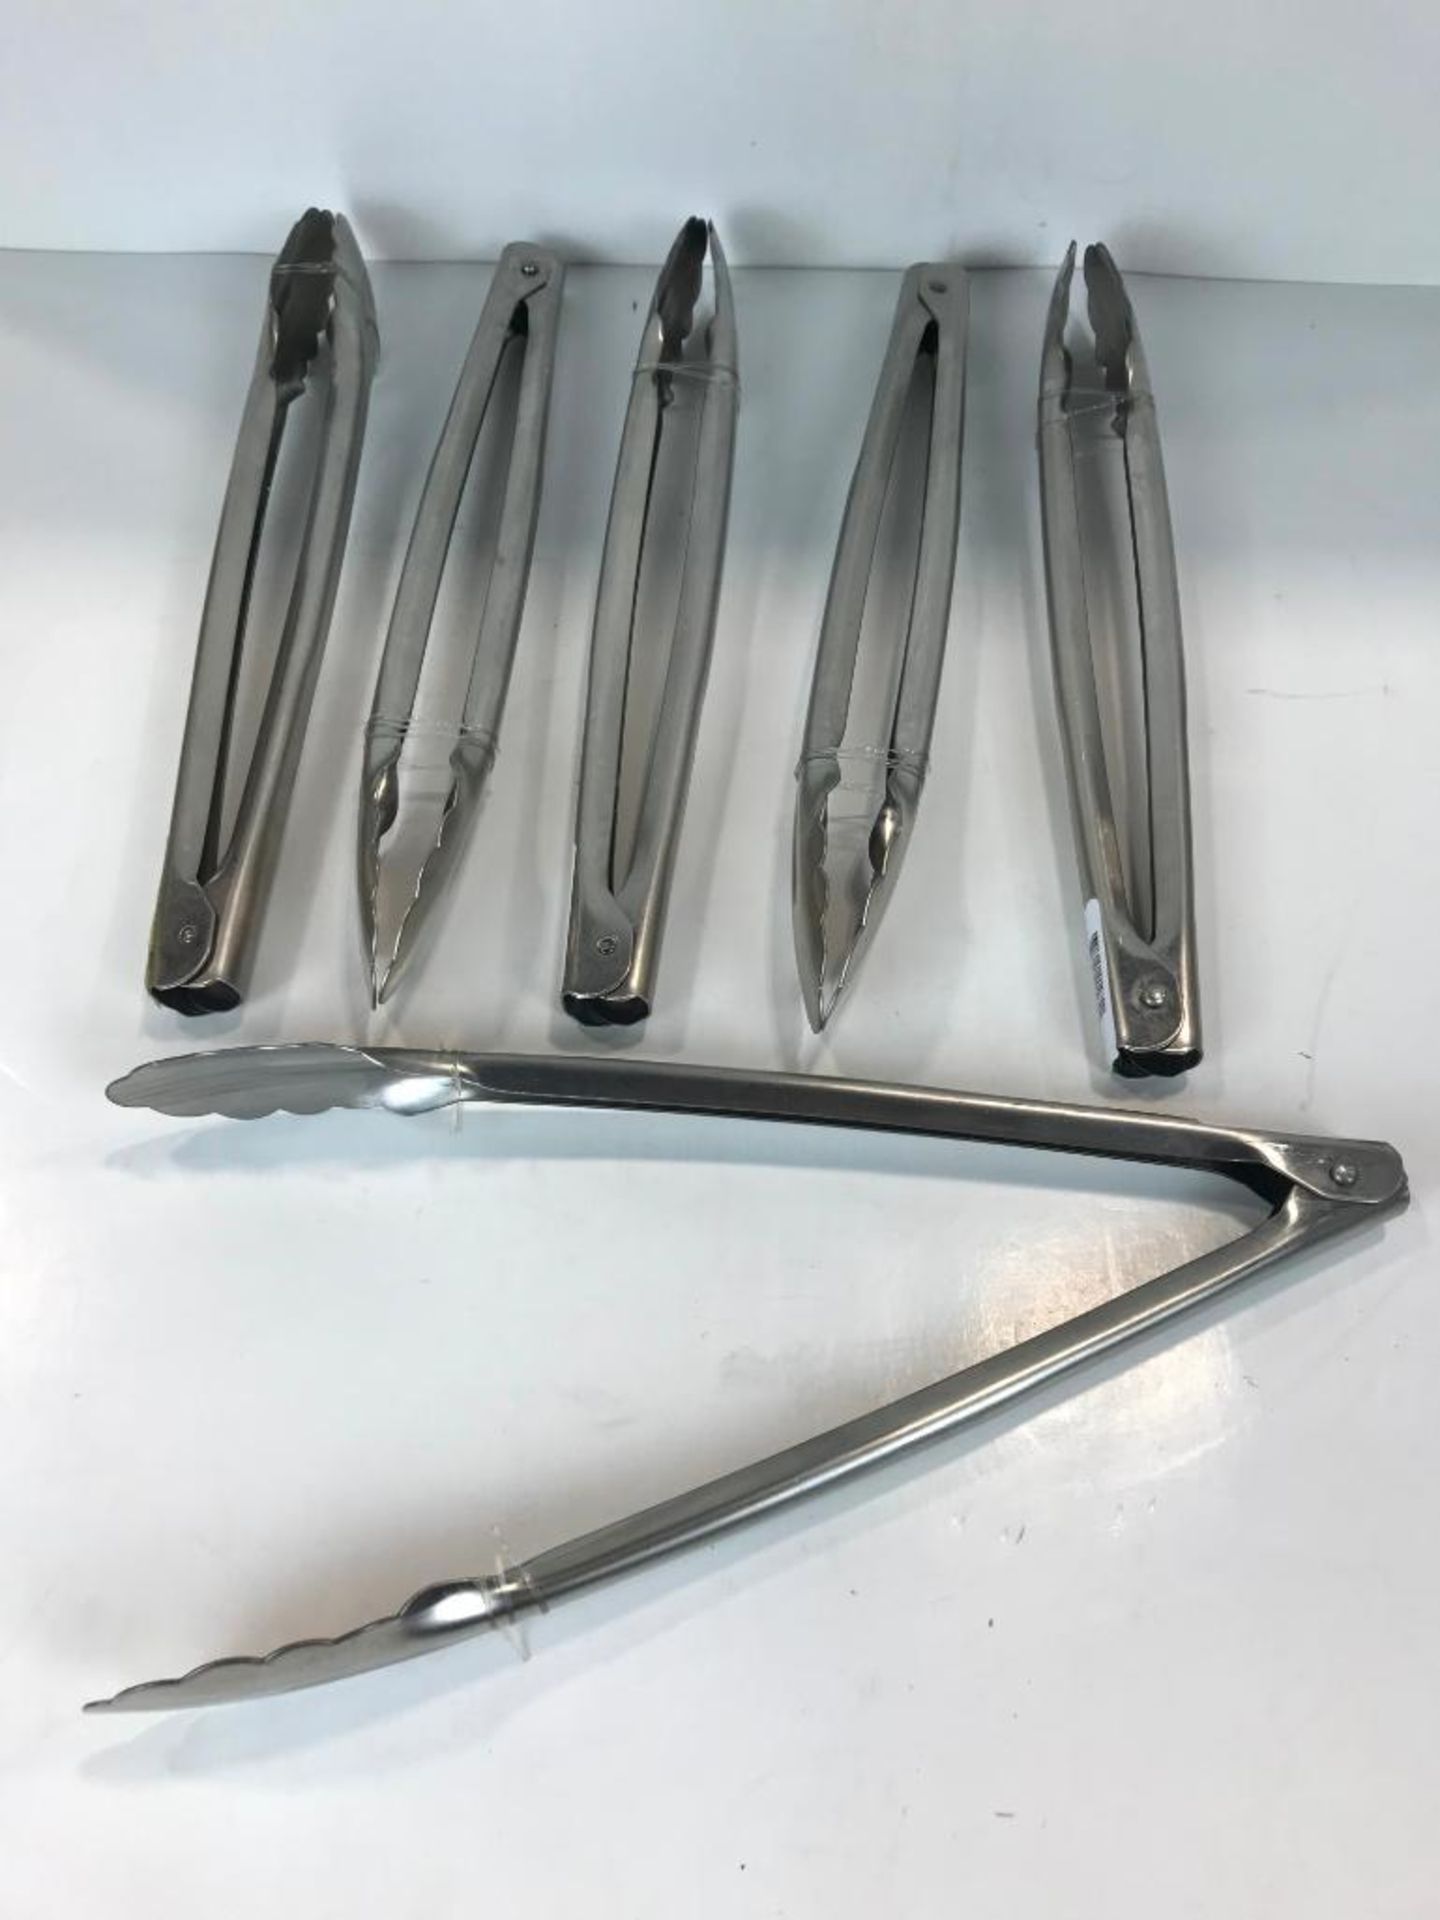 12" STAINLESS EXTRA HEAVY DUTY TONGS - LOT OF 6 - NEW